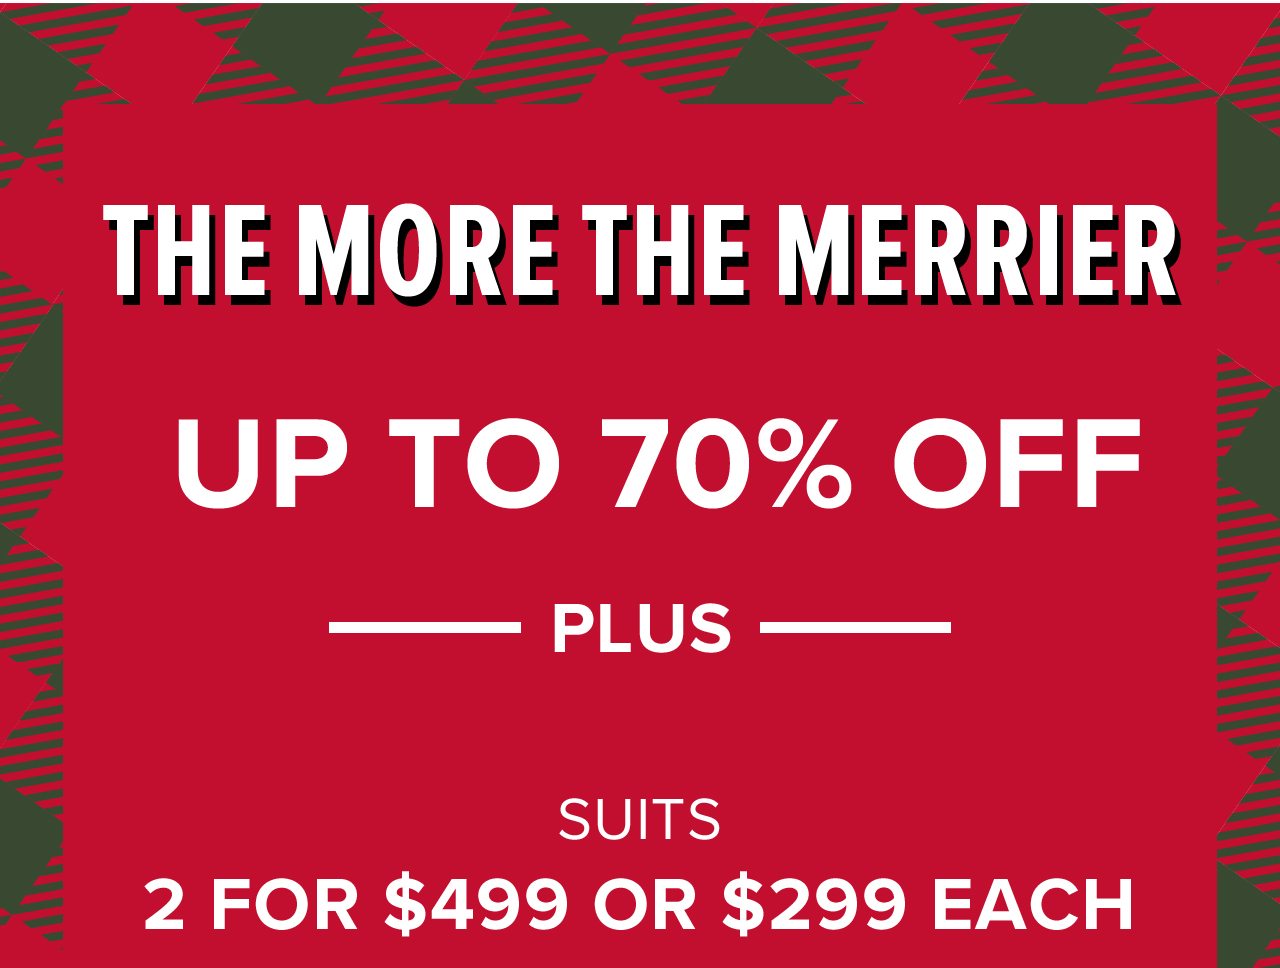 The More The Merrier Up To 70% Off Plus Suits 2 For $499 Or $299 Each